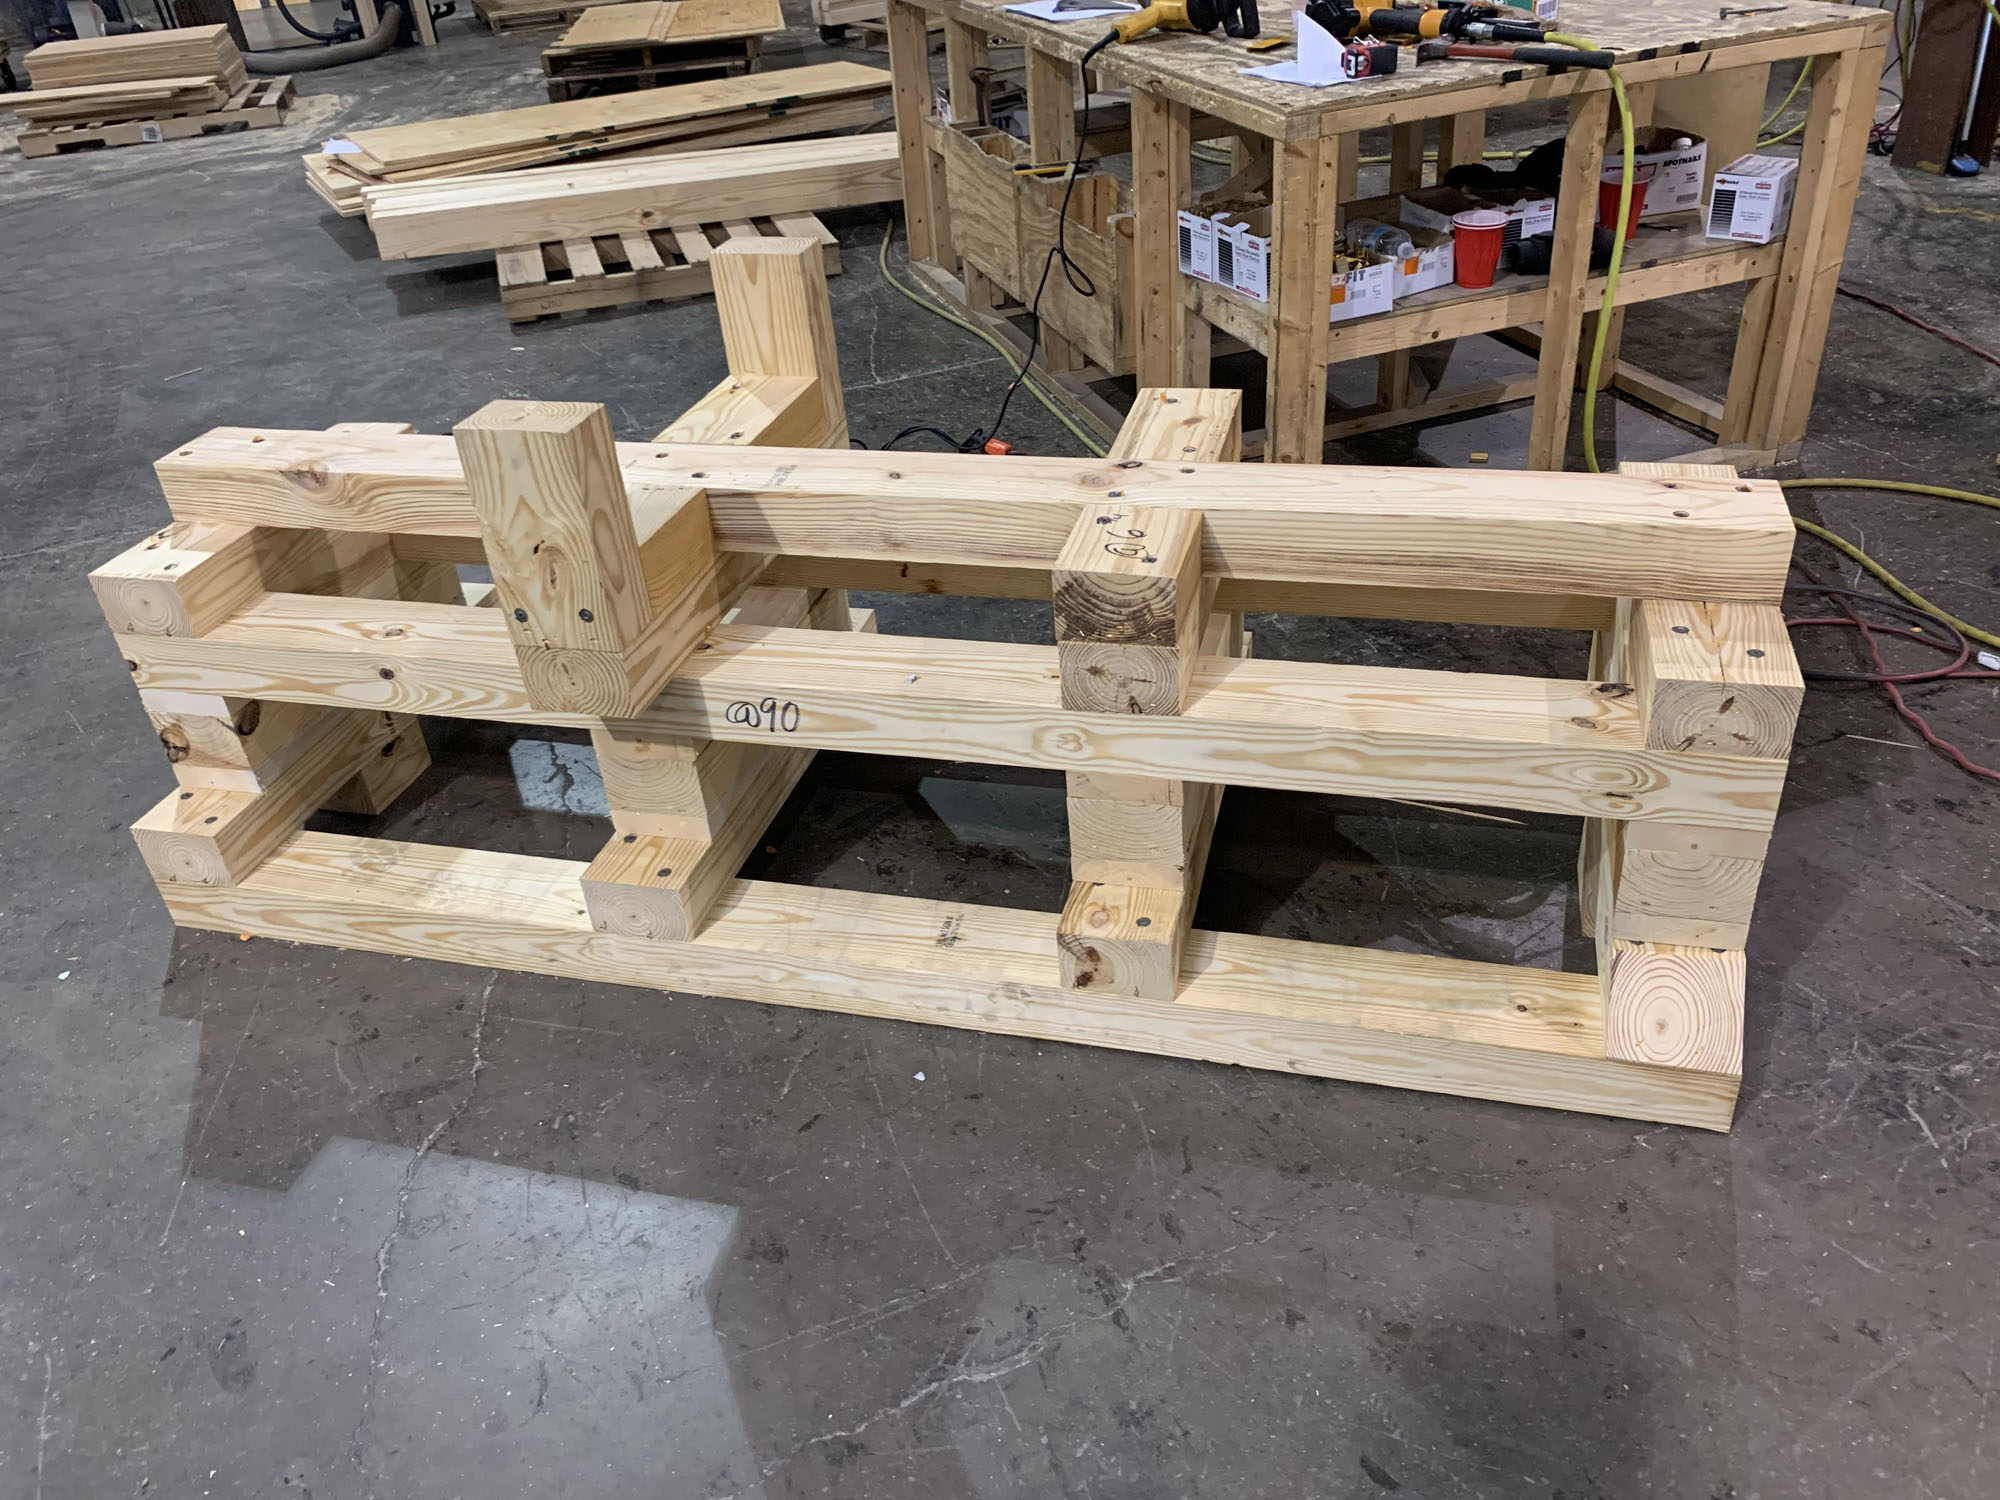 Specialty Item Crating | A Specialty Item Crated for Shipping